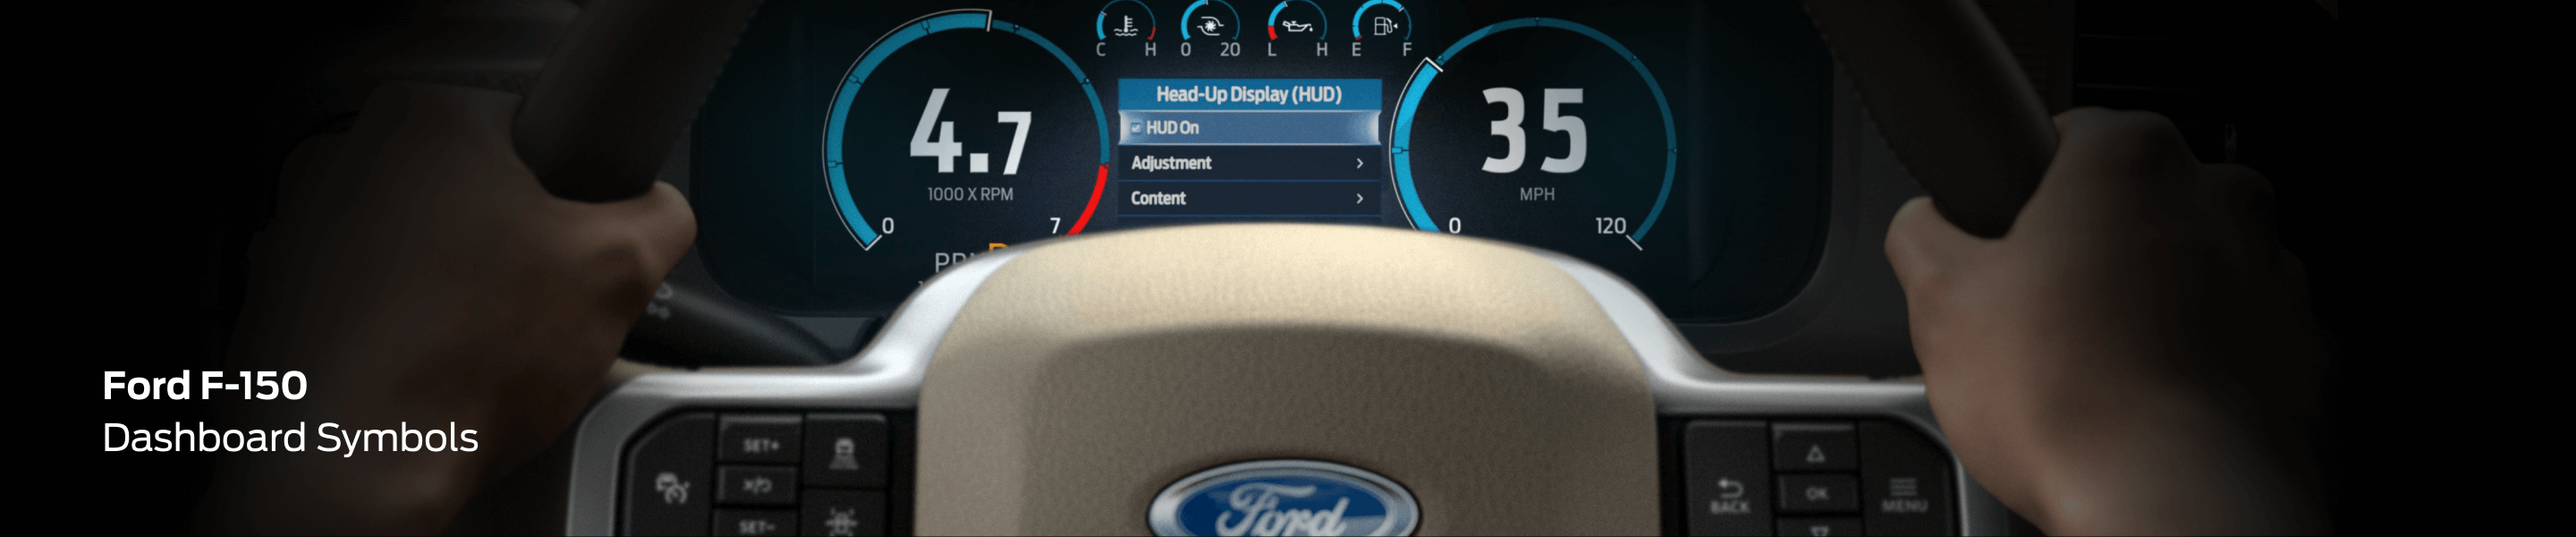 Ford F-150 Dashboard Symbols Meanings